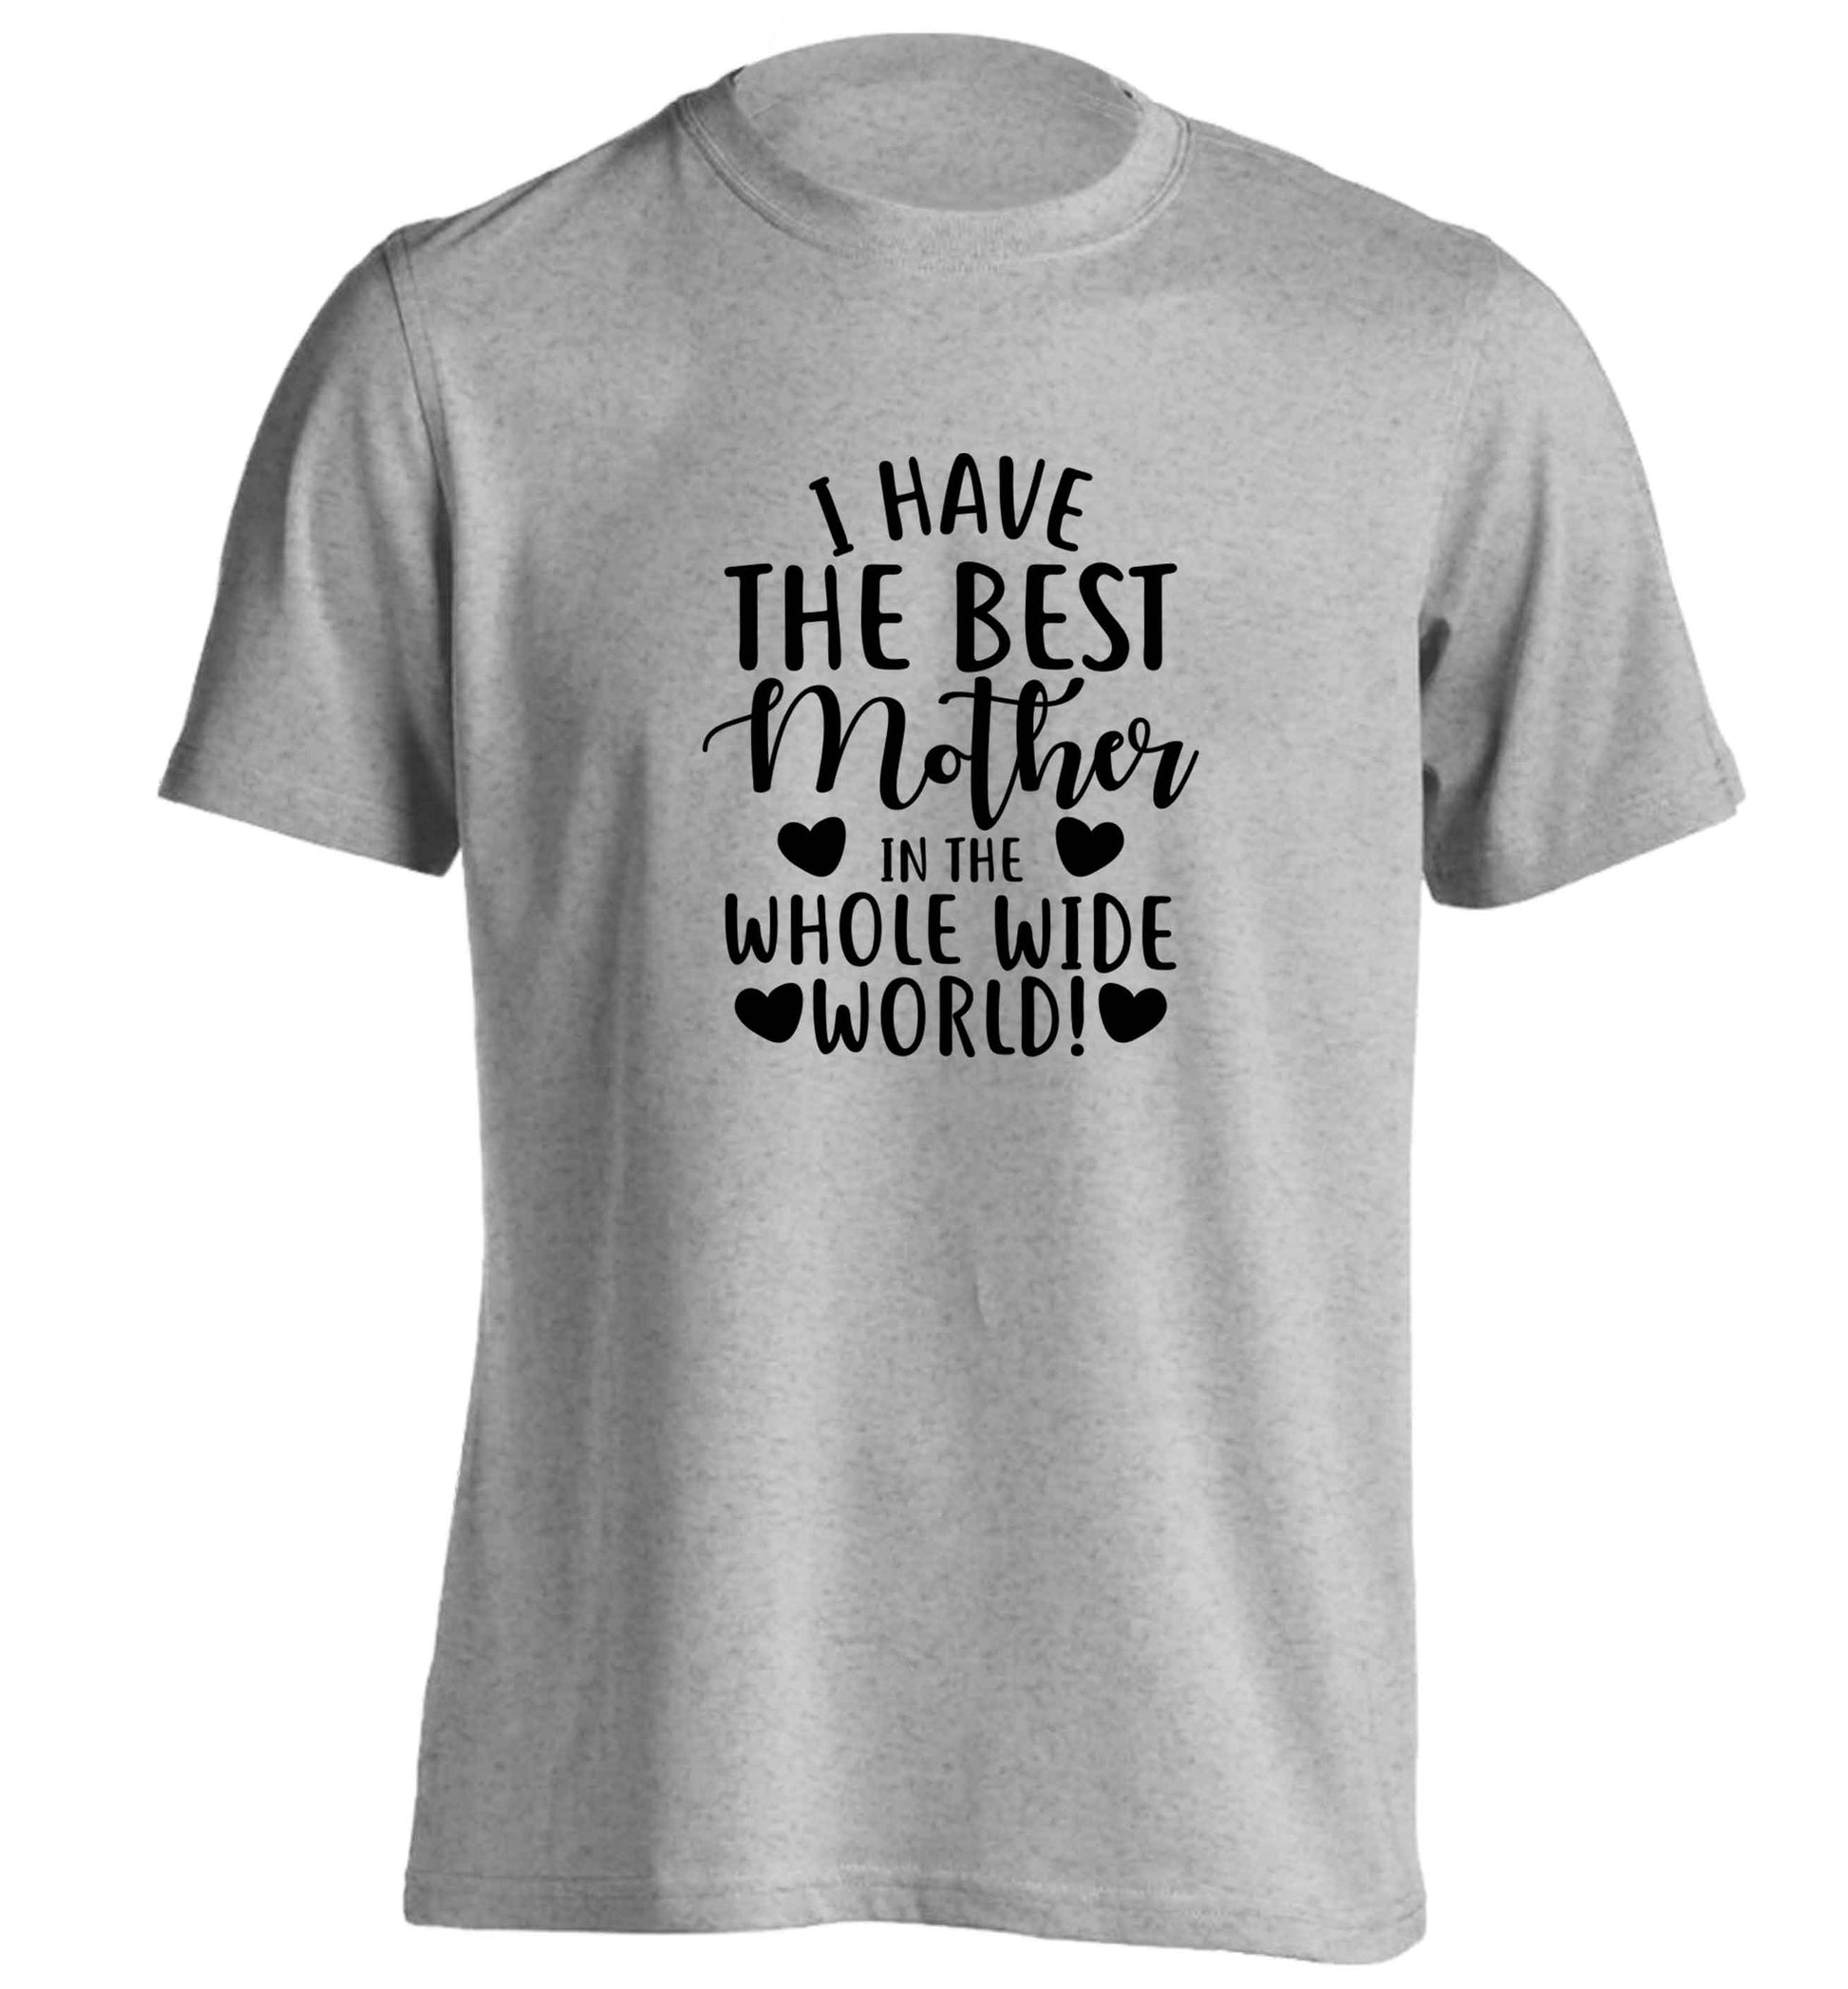 I have the best mother in the whole wide world adults unisex grey Tshirt 2XL